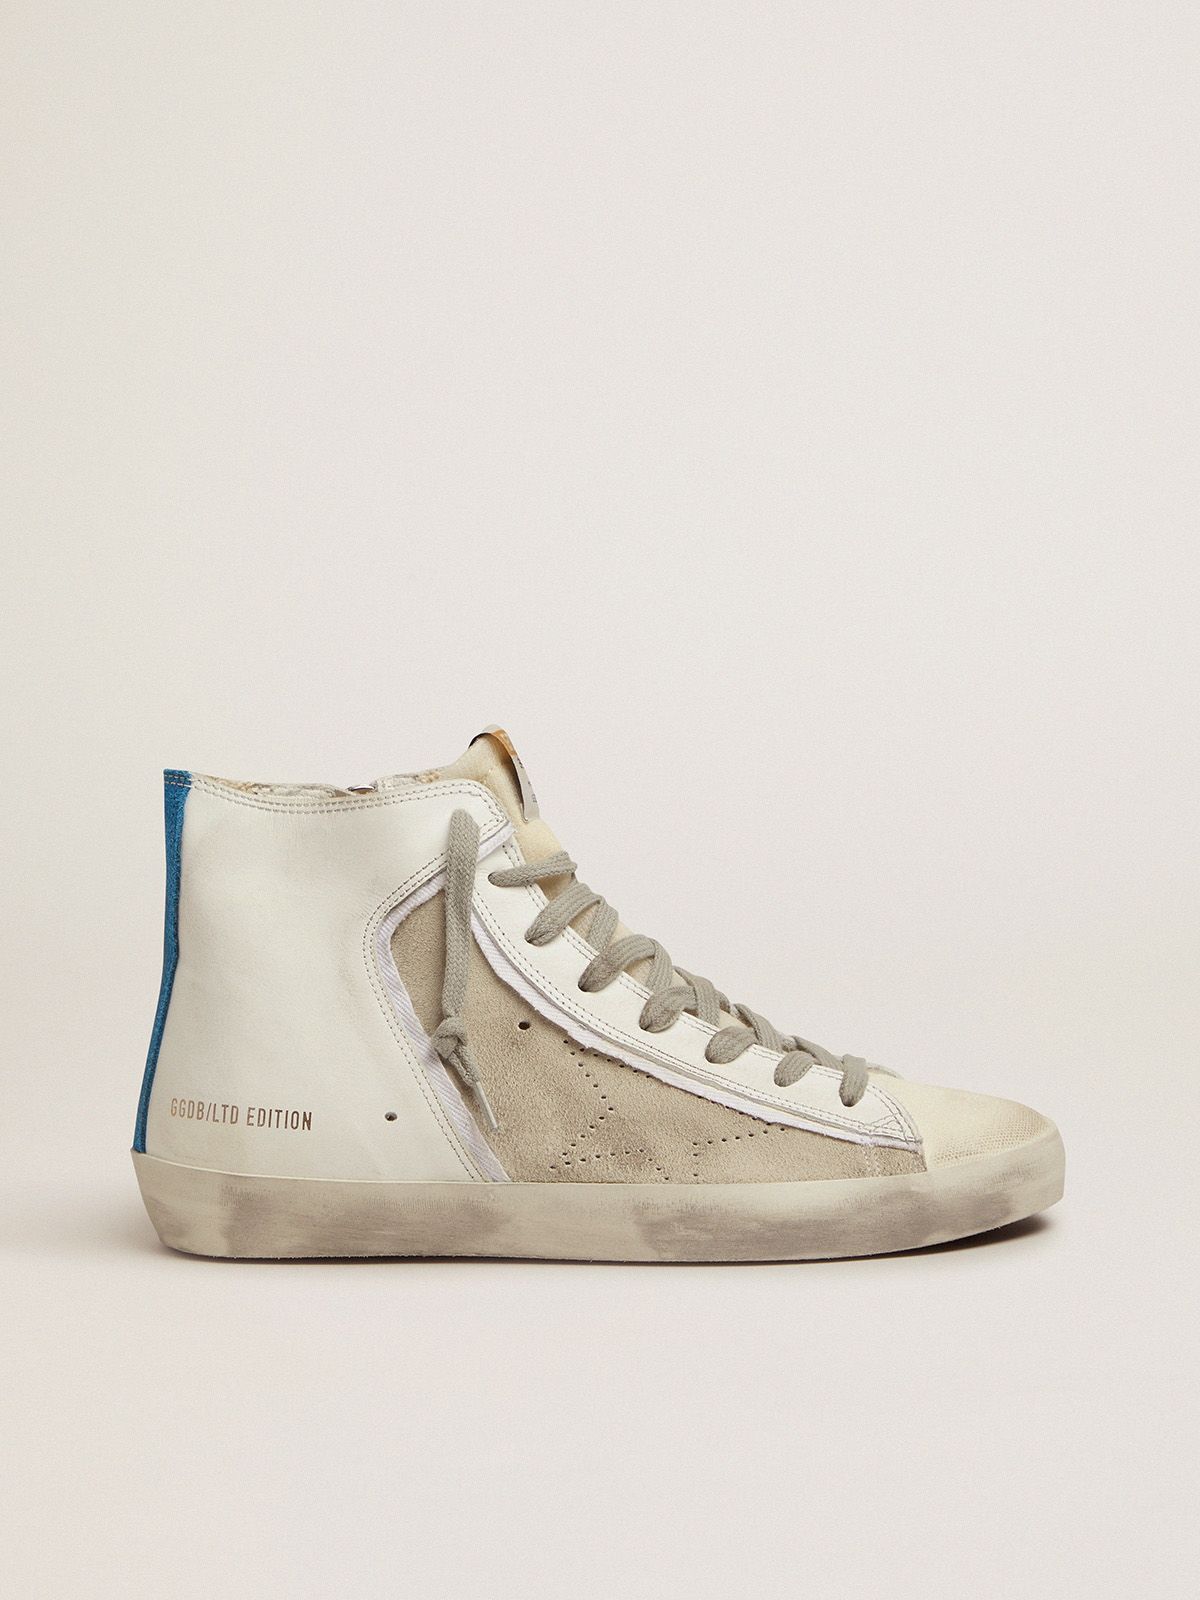 Women's Limited Edition blue and white Francy sneakers | 